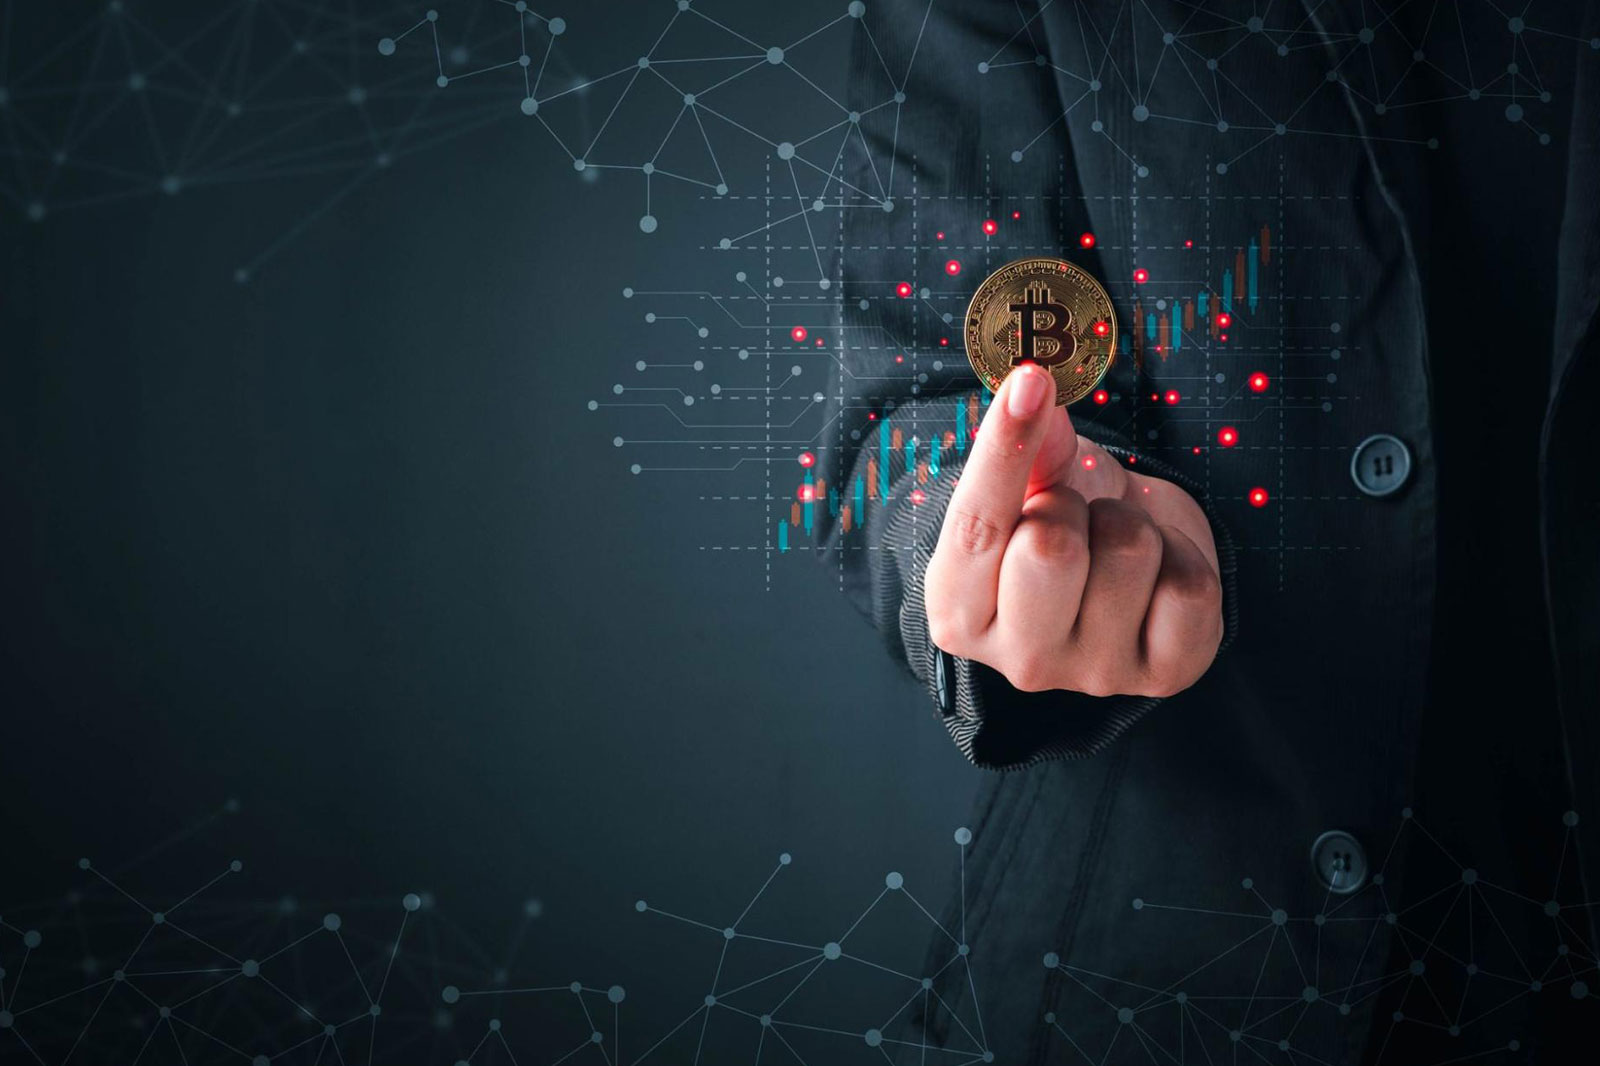 Cropped image of a man in a suit, holding a bitcoin